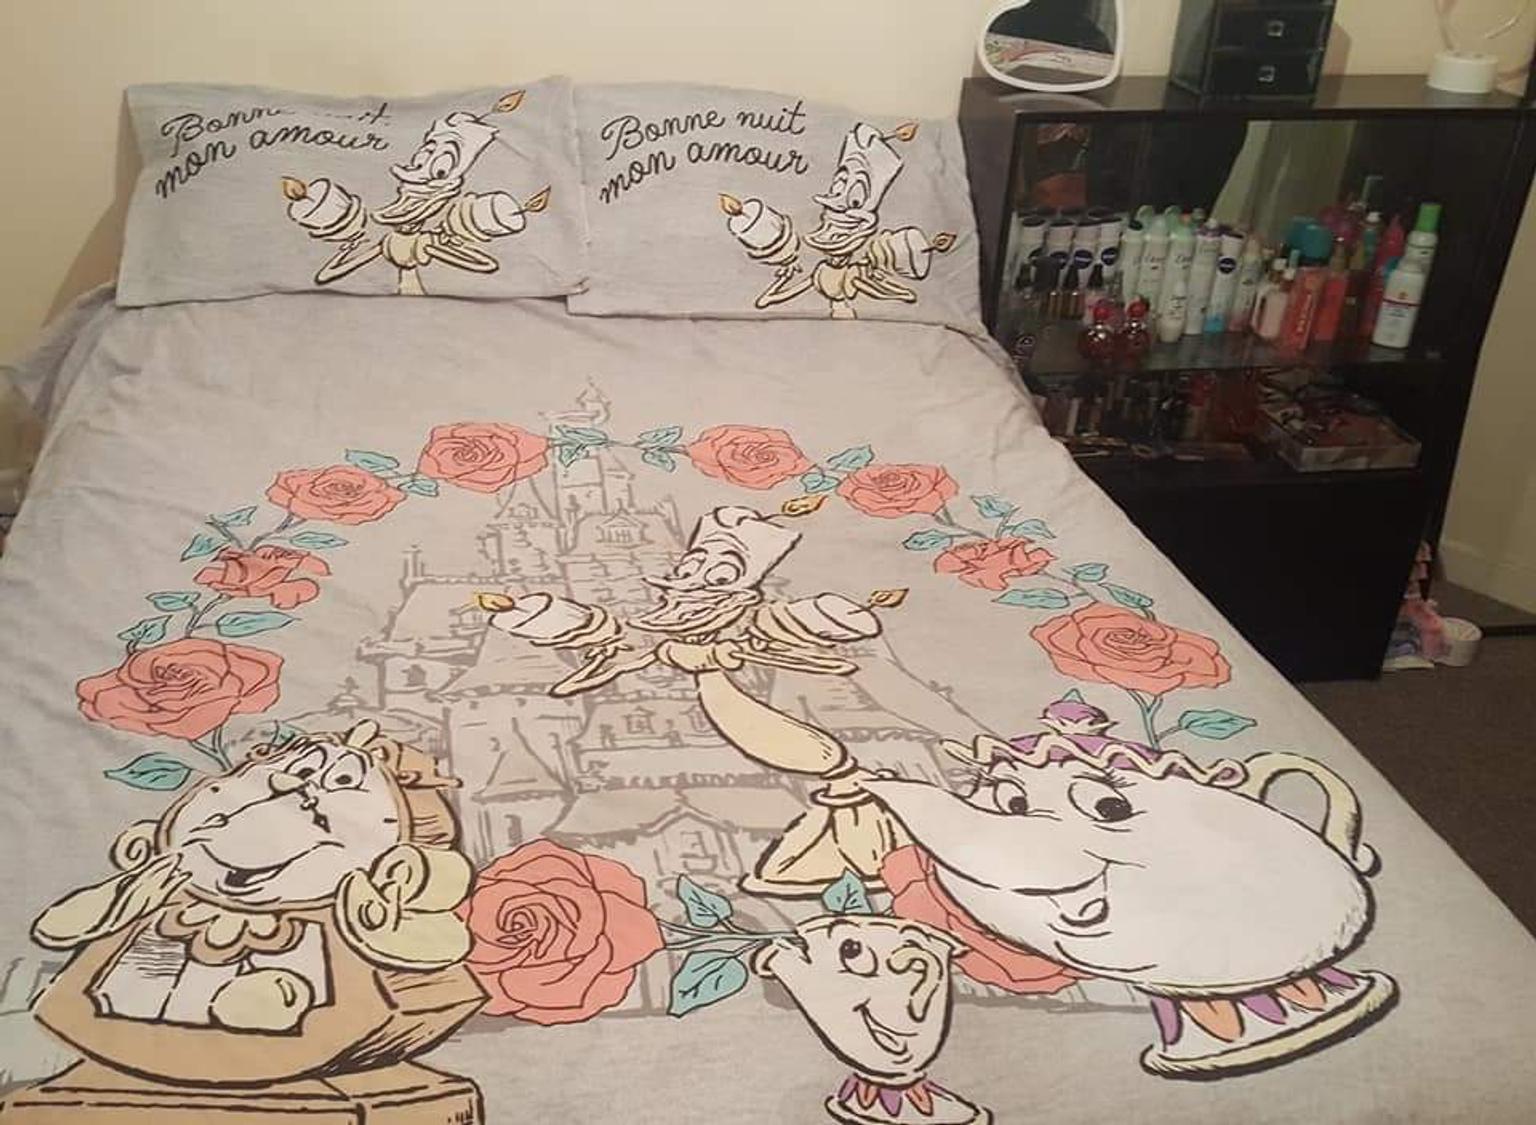 Double Size Disney Bedding In M46 Wigan For 45 00 For Sale Shpock